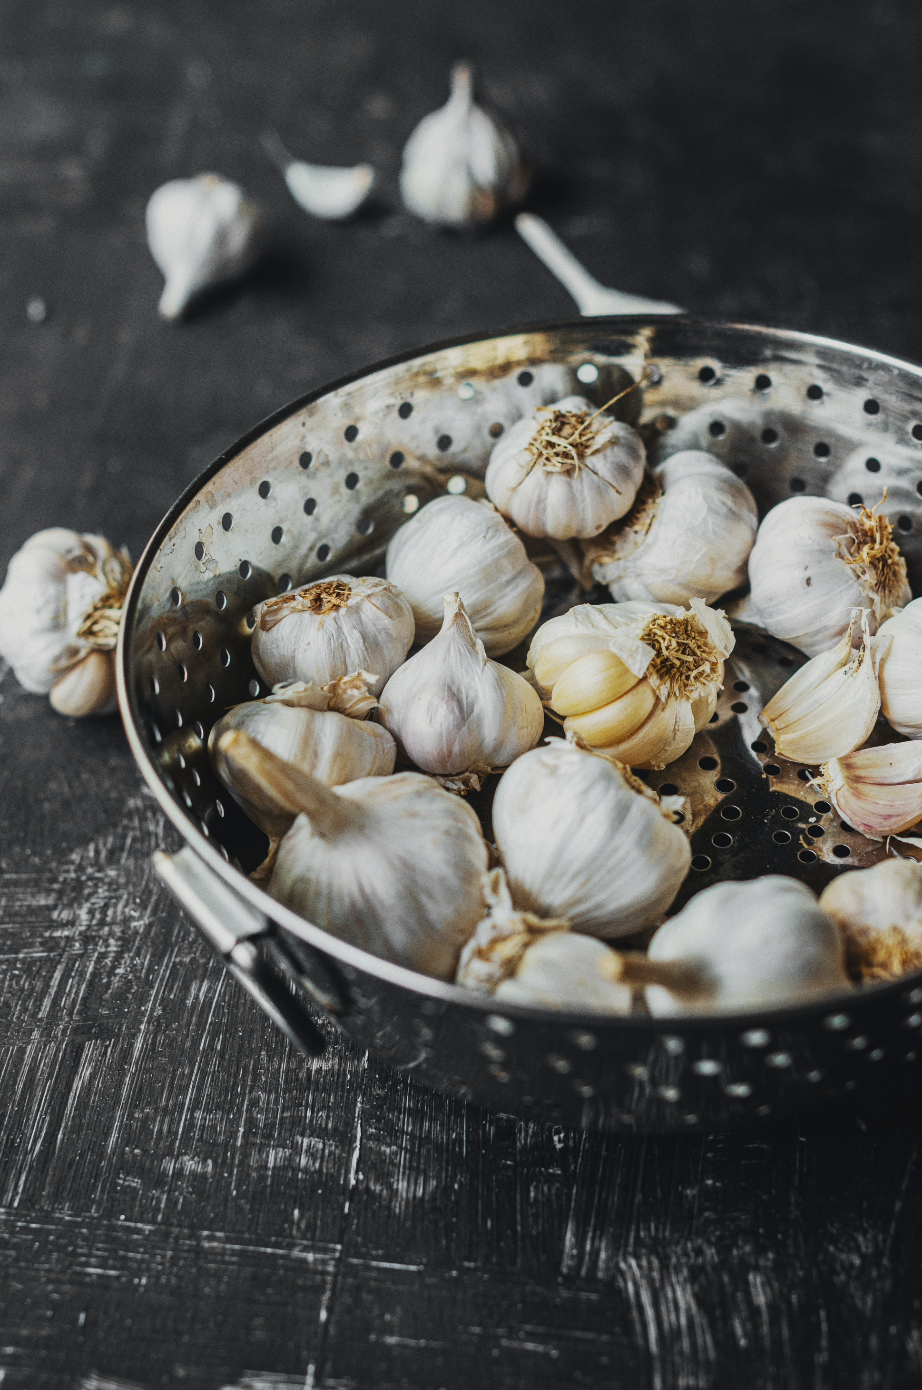 The health benefits of garlic and how to cook with it